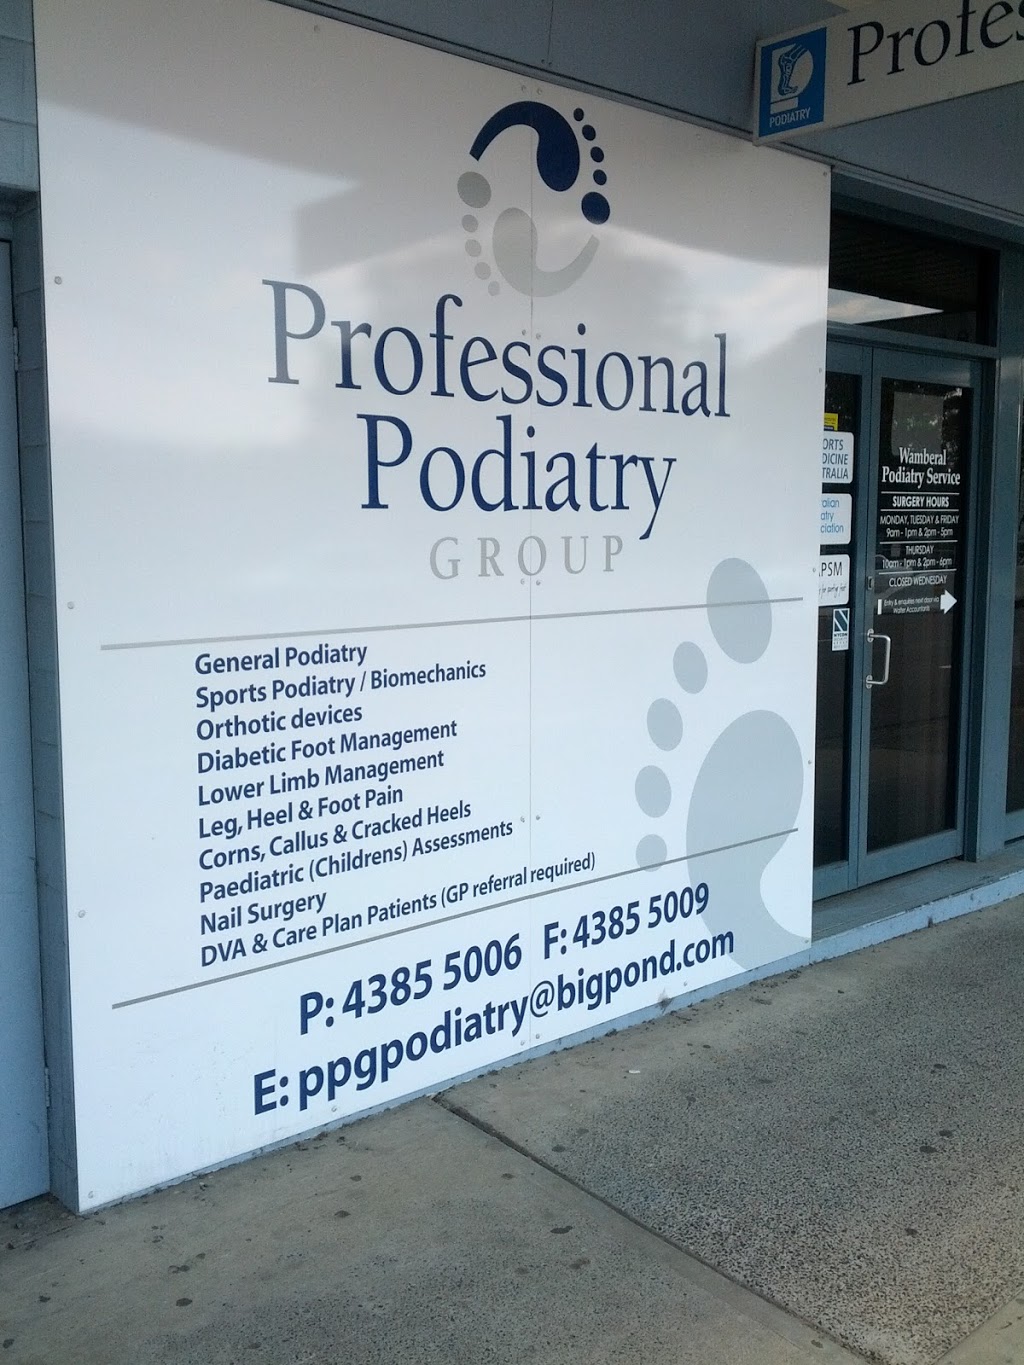 Wamberal Podiatry | doctor | 670 The Entrance Rd, Wamberal NSW 2260, Australia | 0243855006 OR +61 2 4385 5006